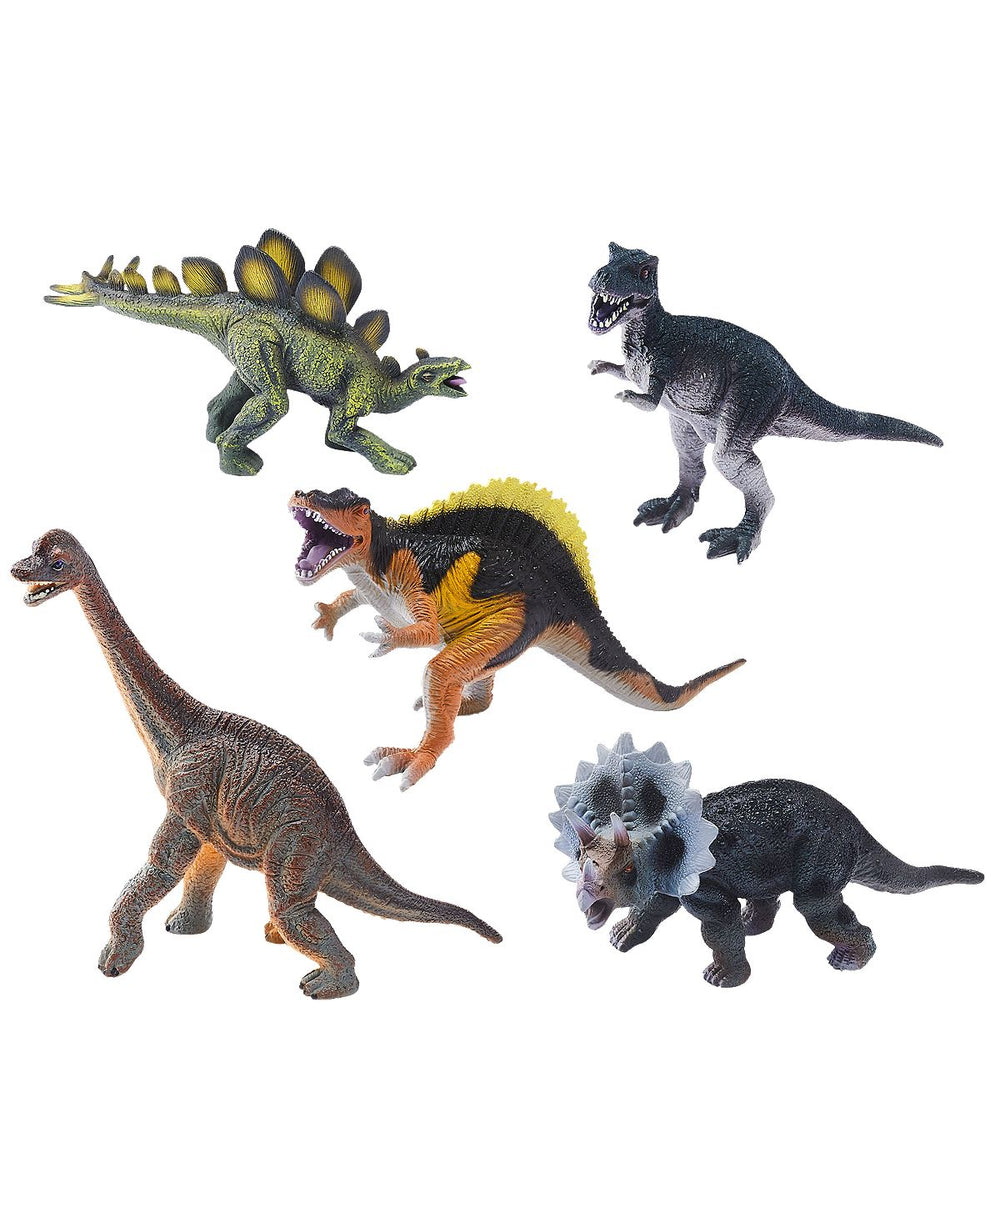 Toys R Us Animal Zone Dino Collectibles 5-Pack - Detailed Prehistoric Figures